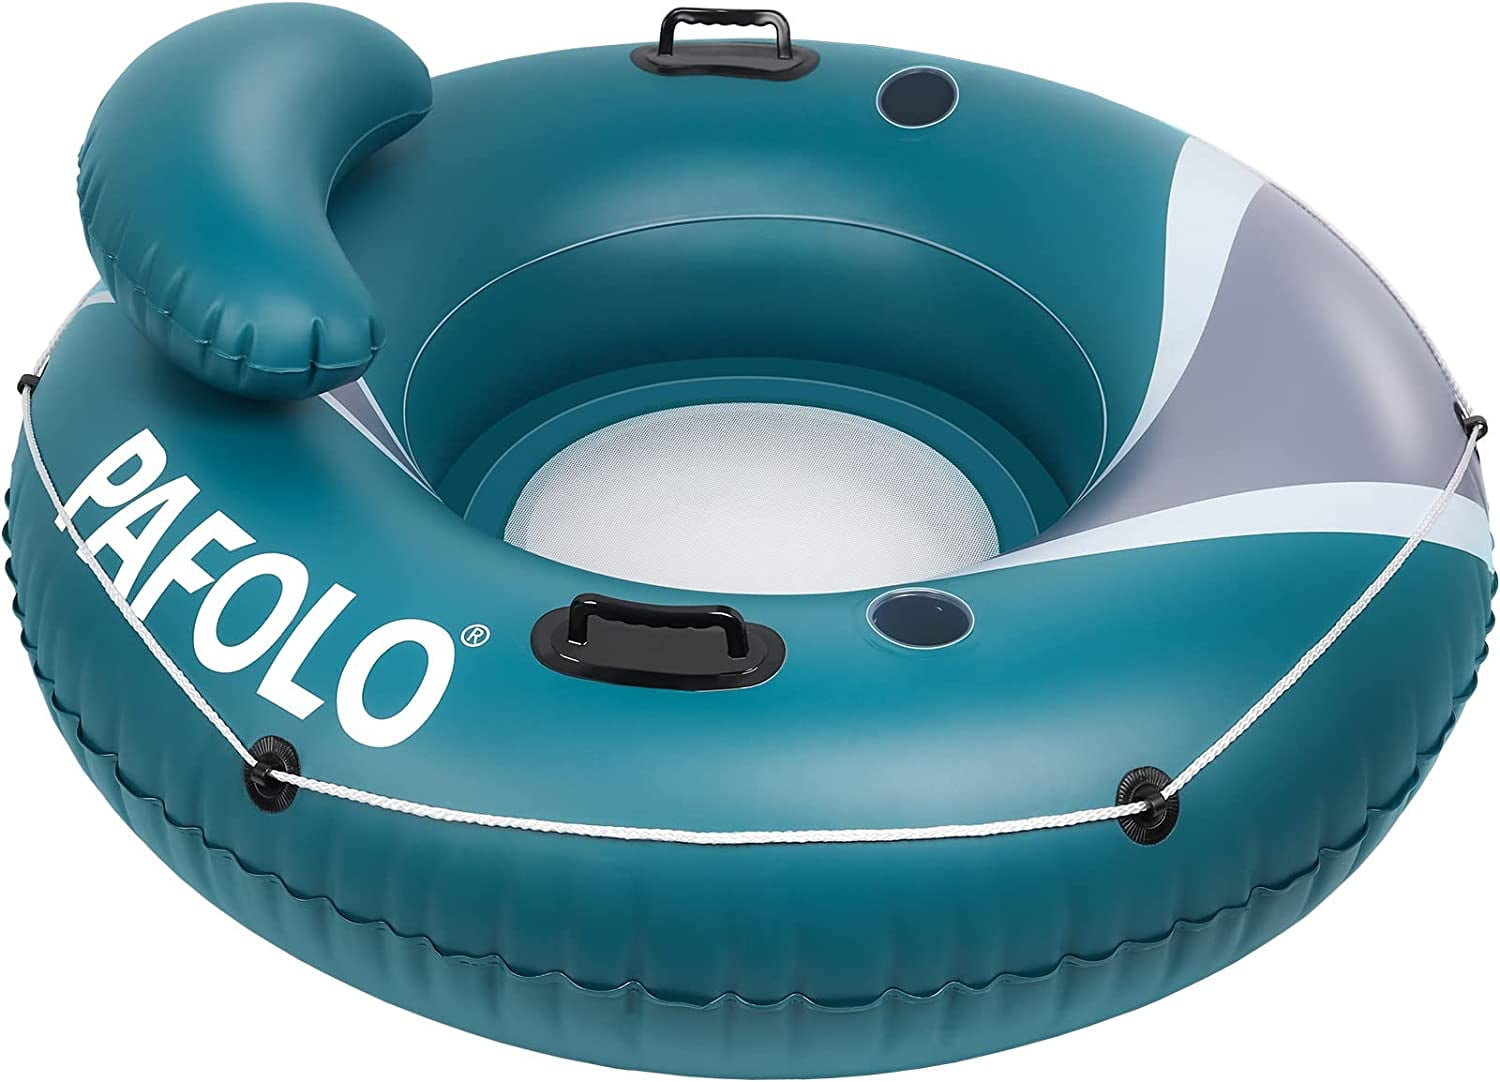 PAFOLO River Floats, River Tubes for Floating Heavy Duty, River Raft with  Mesh Bottom, 2 Cup Holders, 2 Heavy-Duty Handles, Headrest, 53 Inflatable